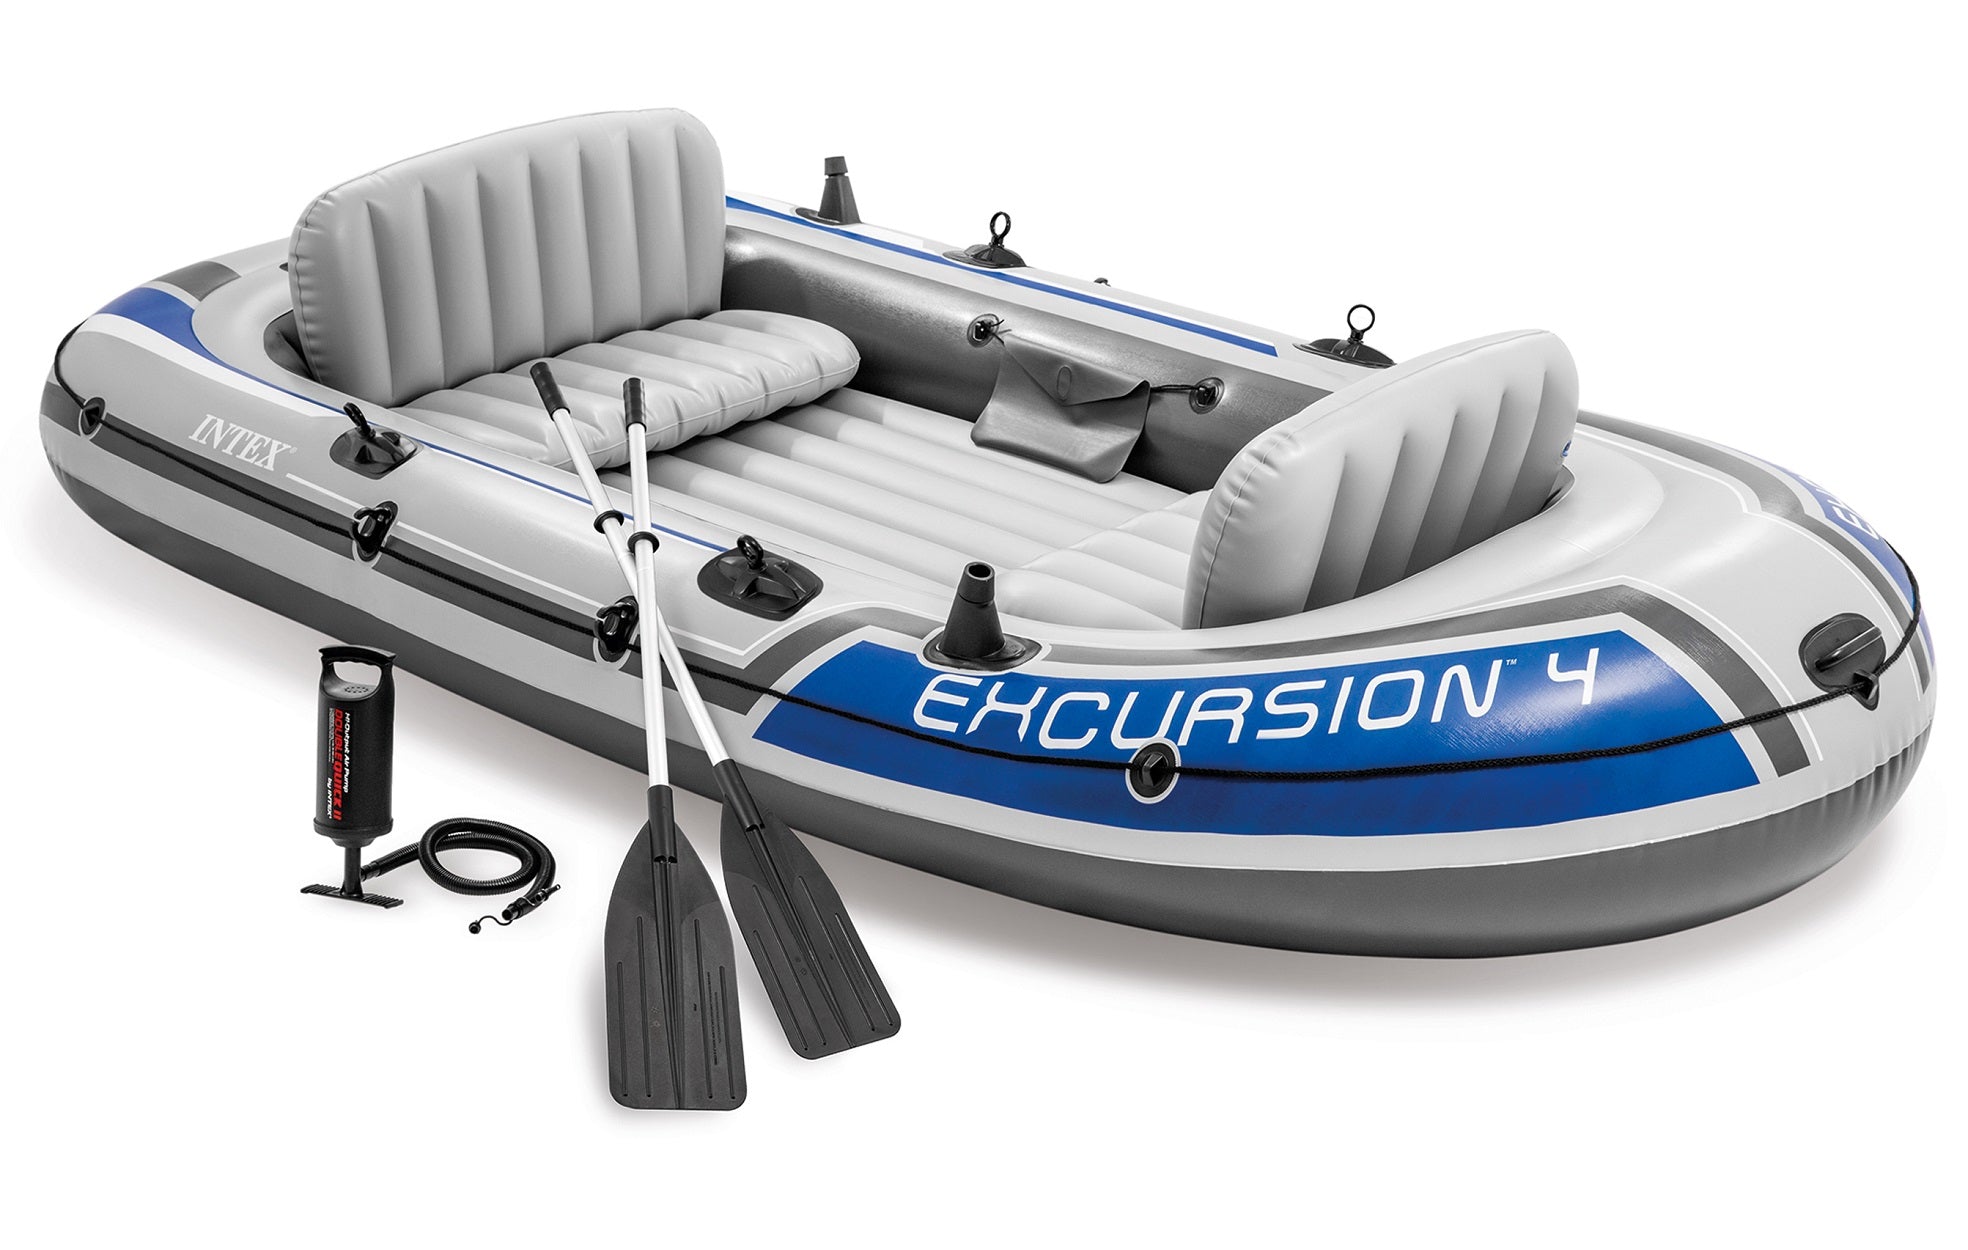 Intex Excursion 4 Inflatable Boat Set - 4 Person with Oar and Pump